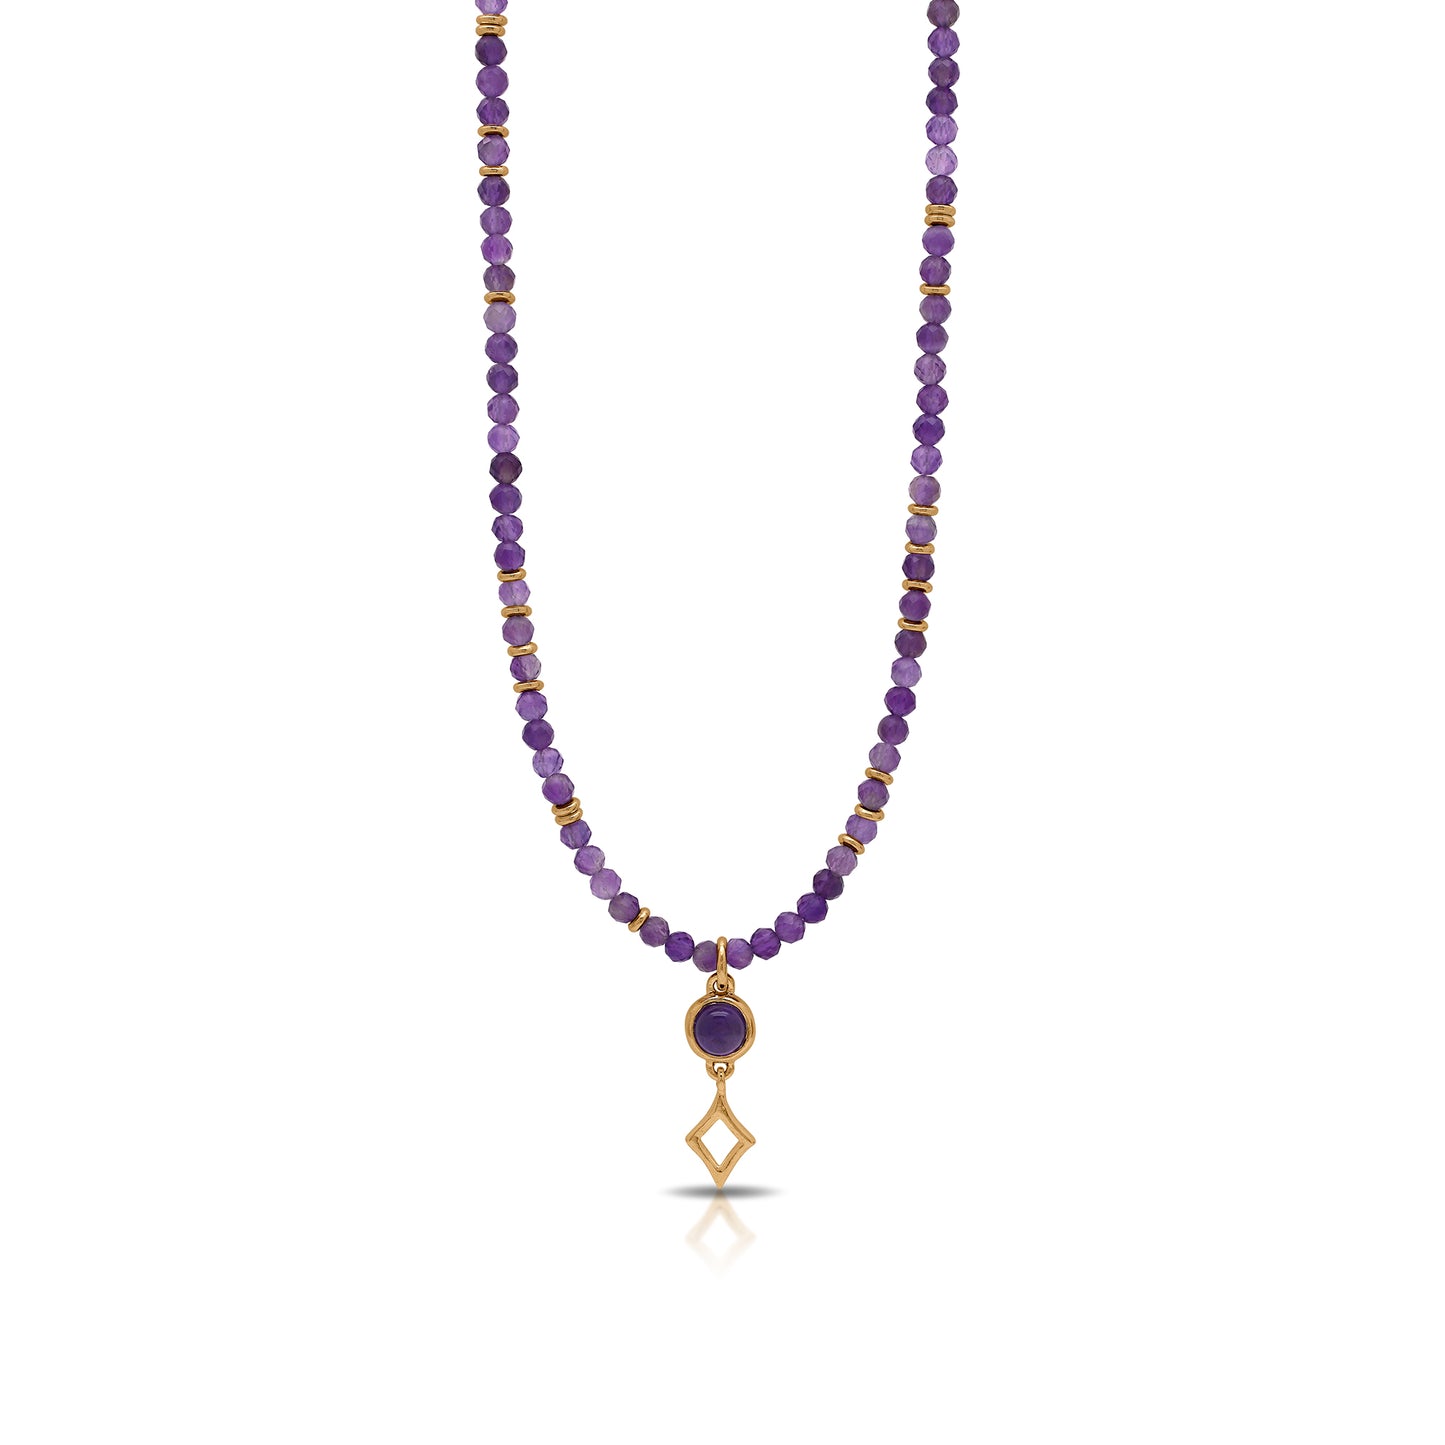 Amethyst Ether Element Beaded Necklace and Pendant